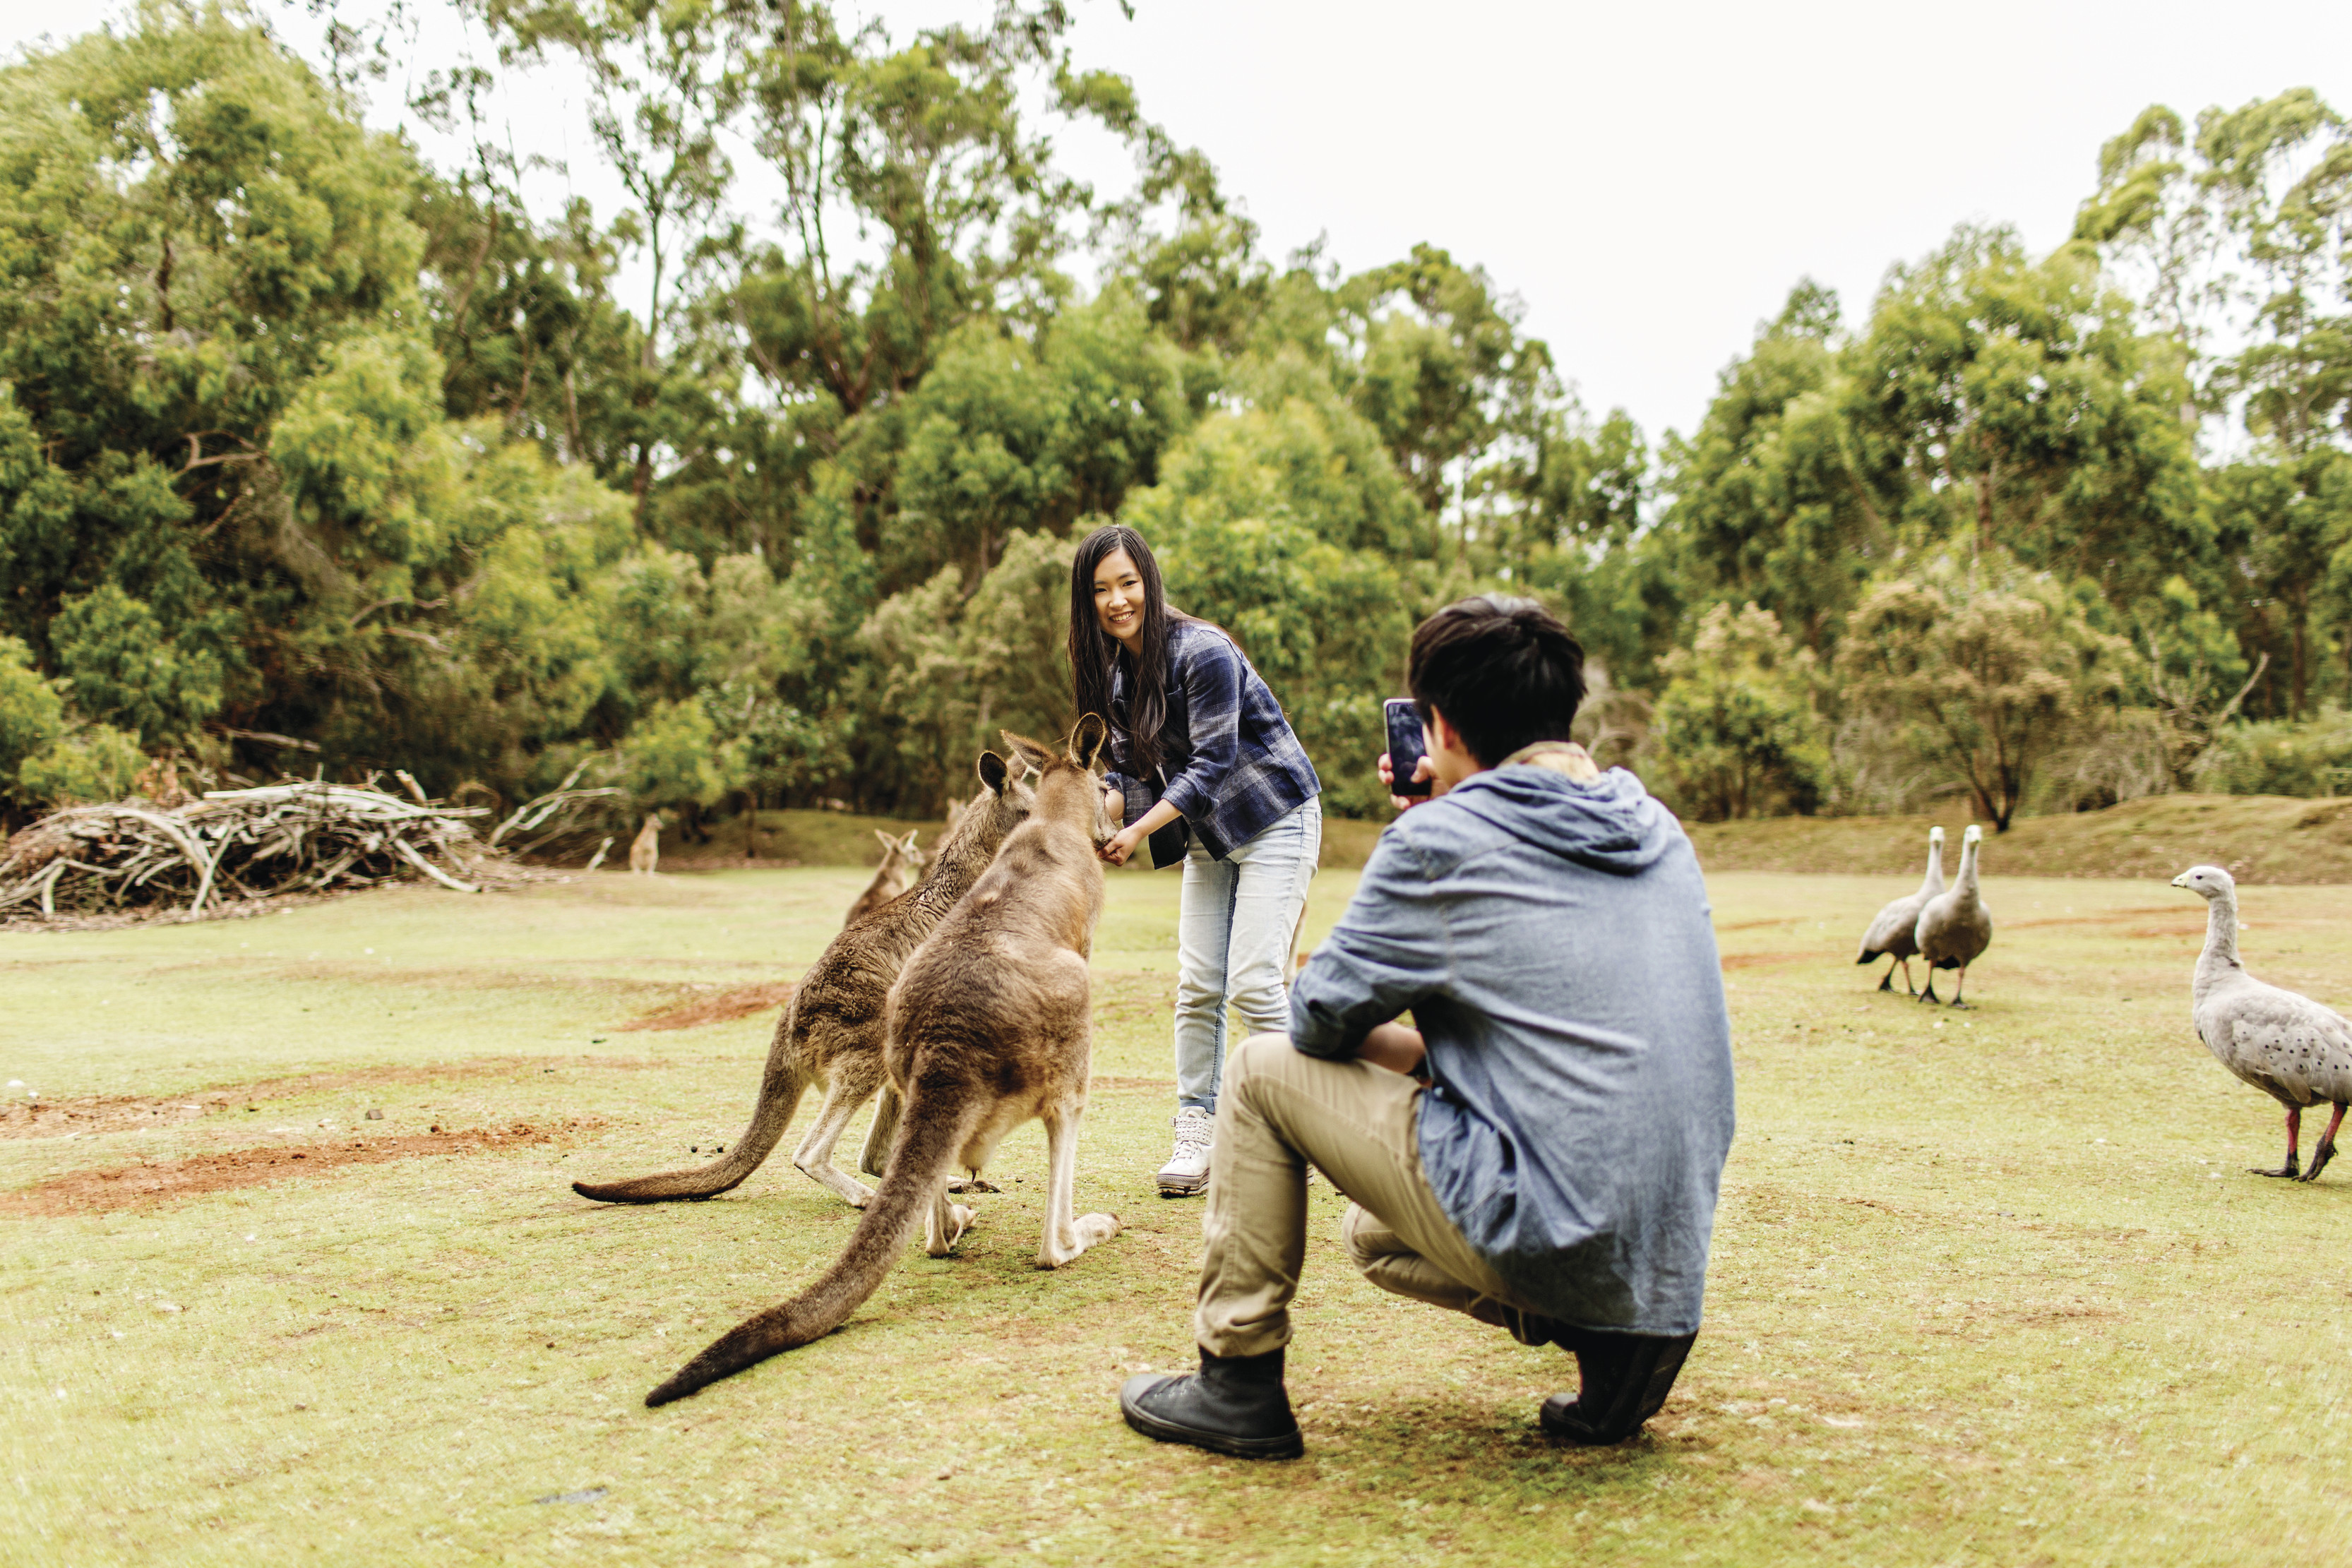 Two people take a photo while closely surrounded by a number of kangaroos and geese, at Tasmanian Devil Unzoo.